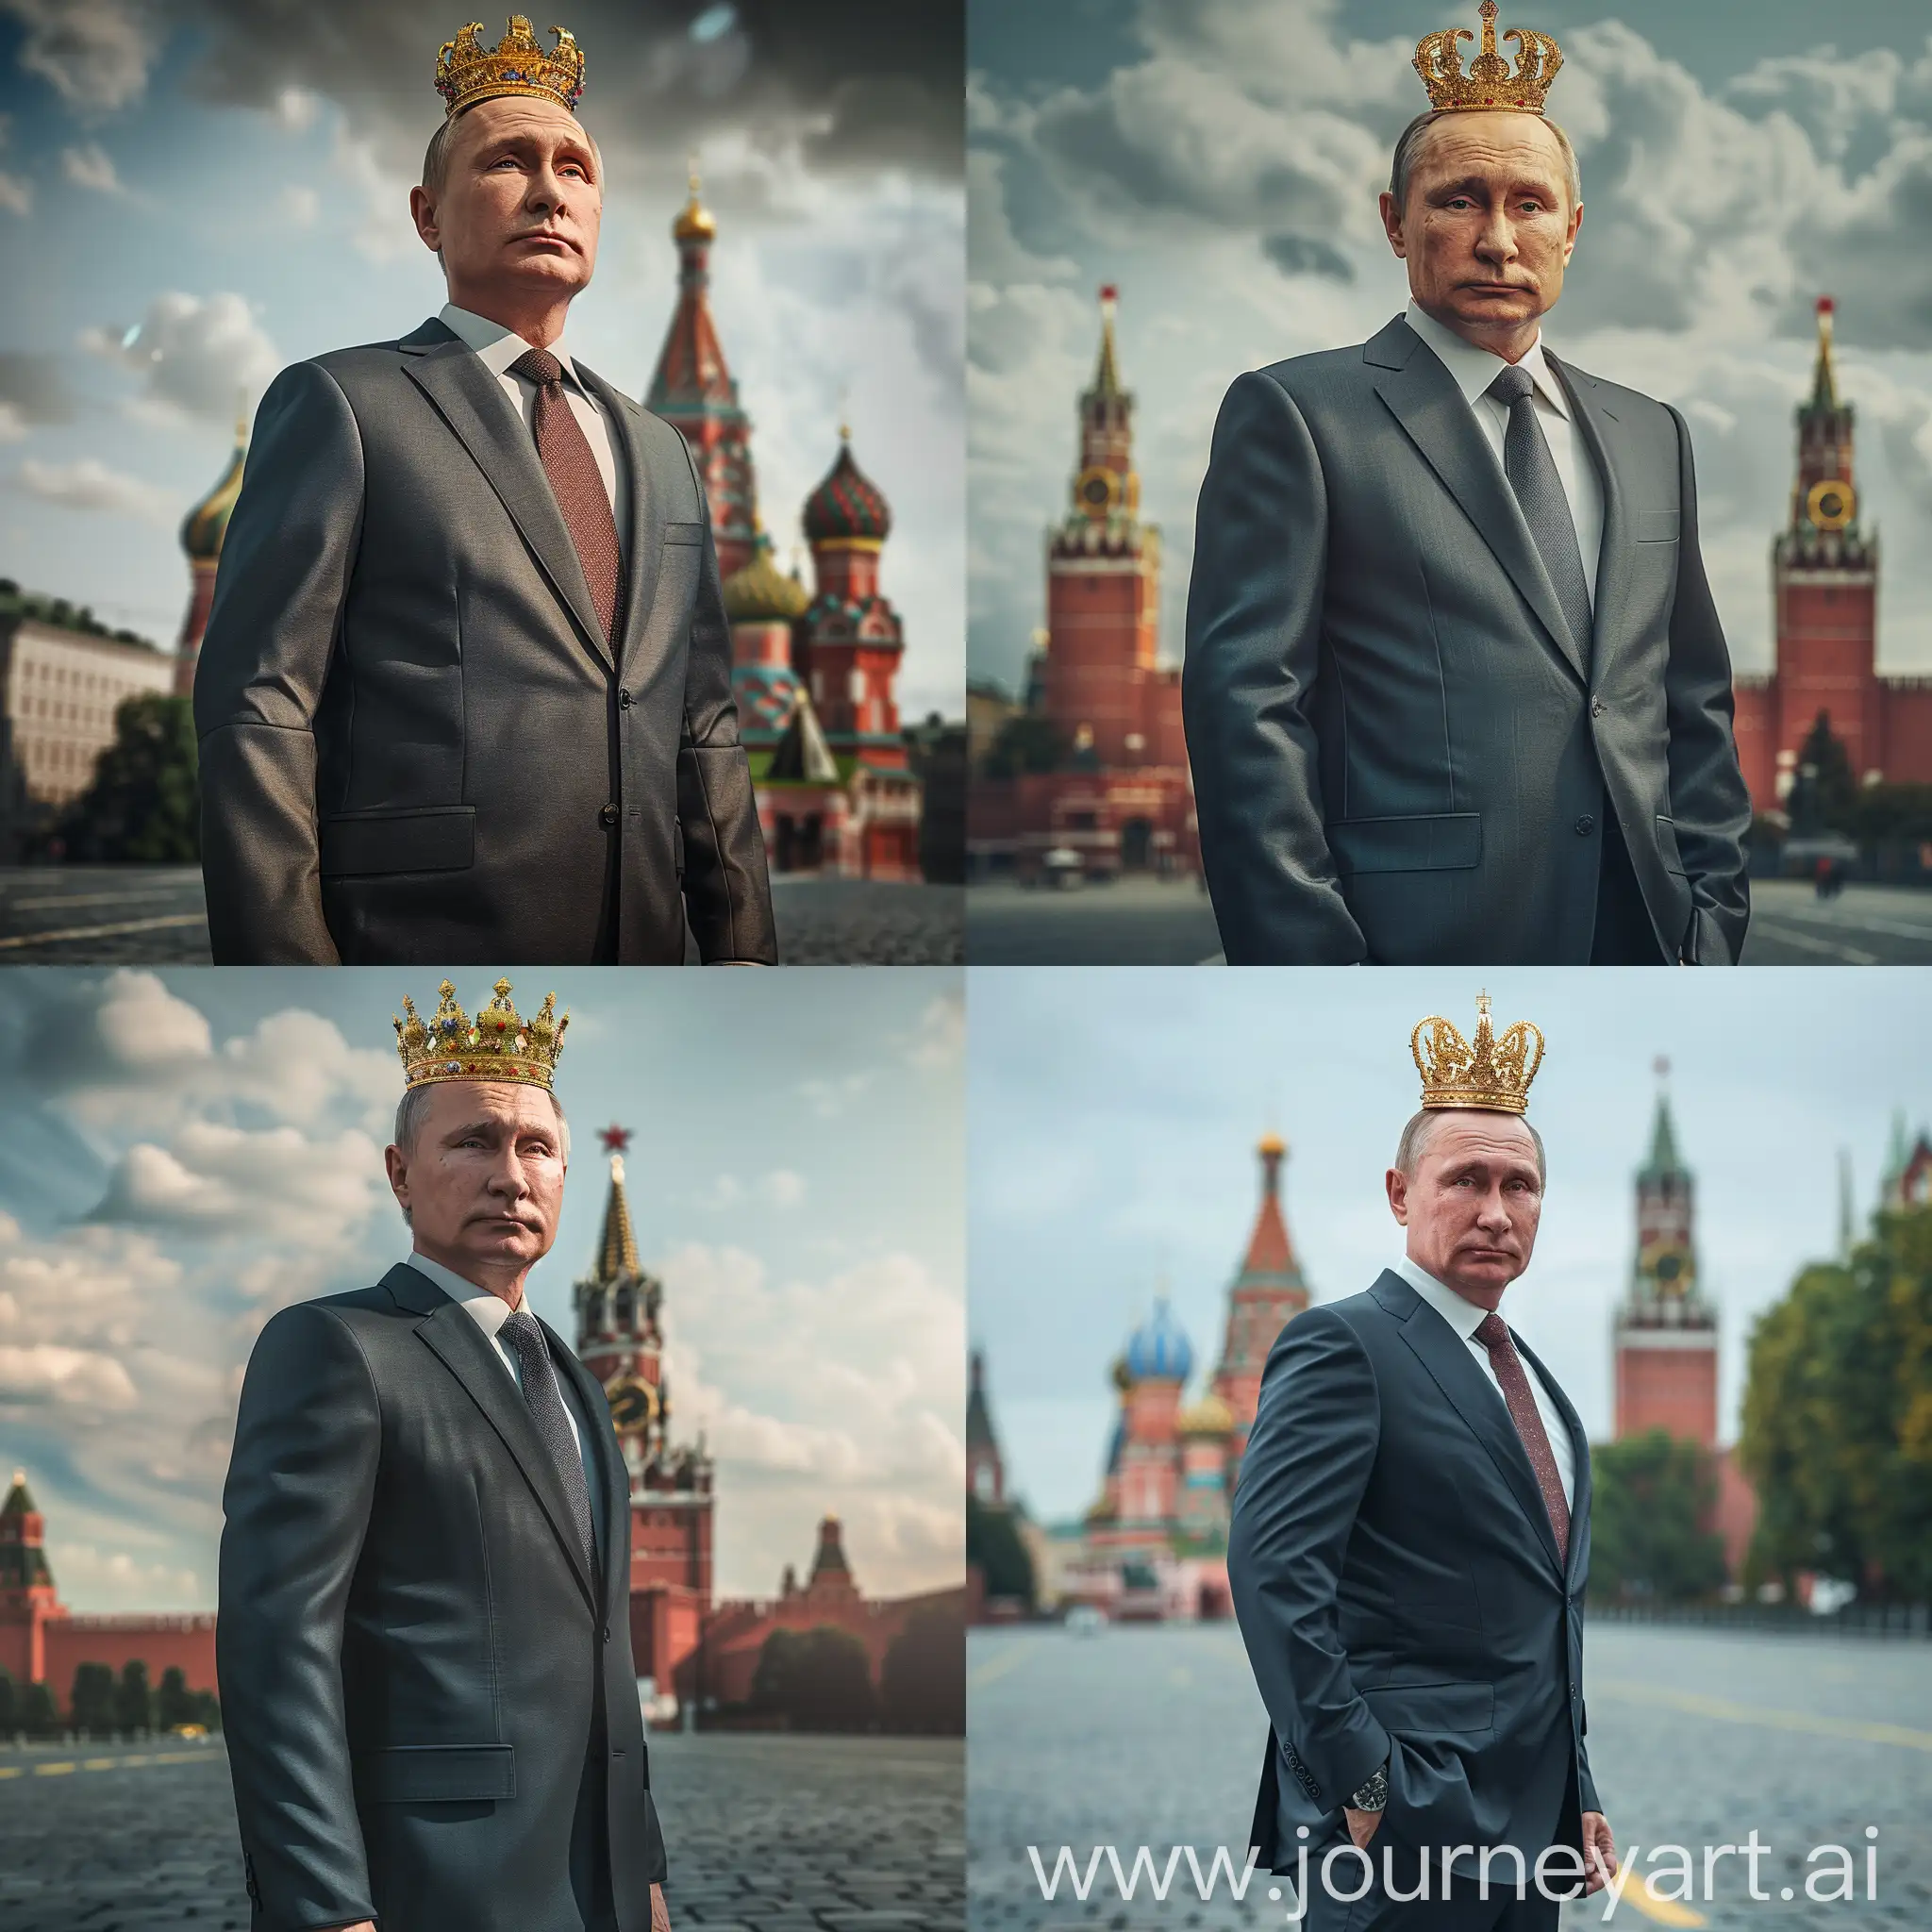 Vladimir-Putin-Wearing-Golden-Crown-on-Red-Square-Victory-Day-Style